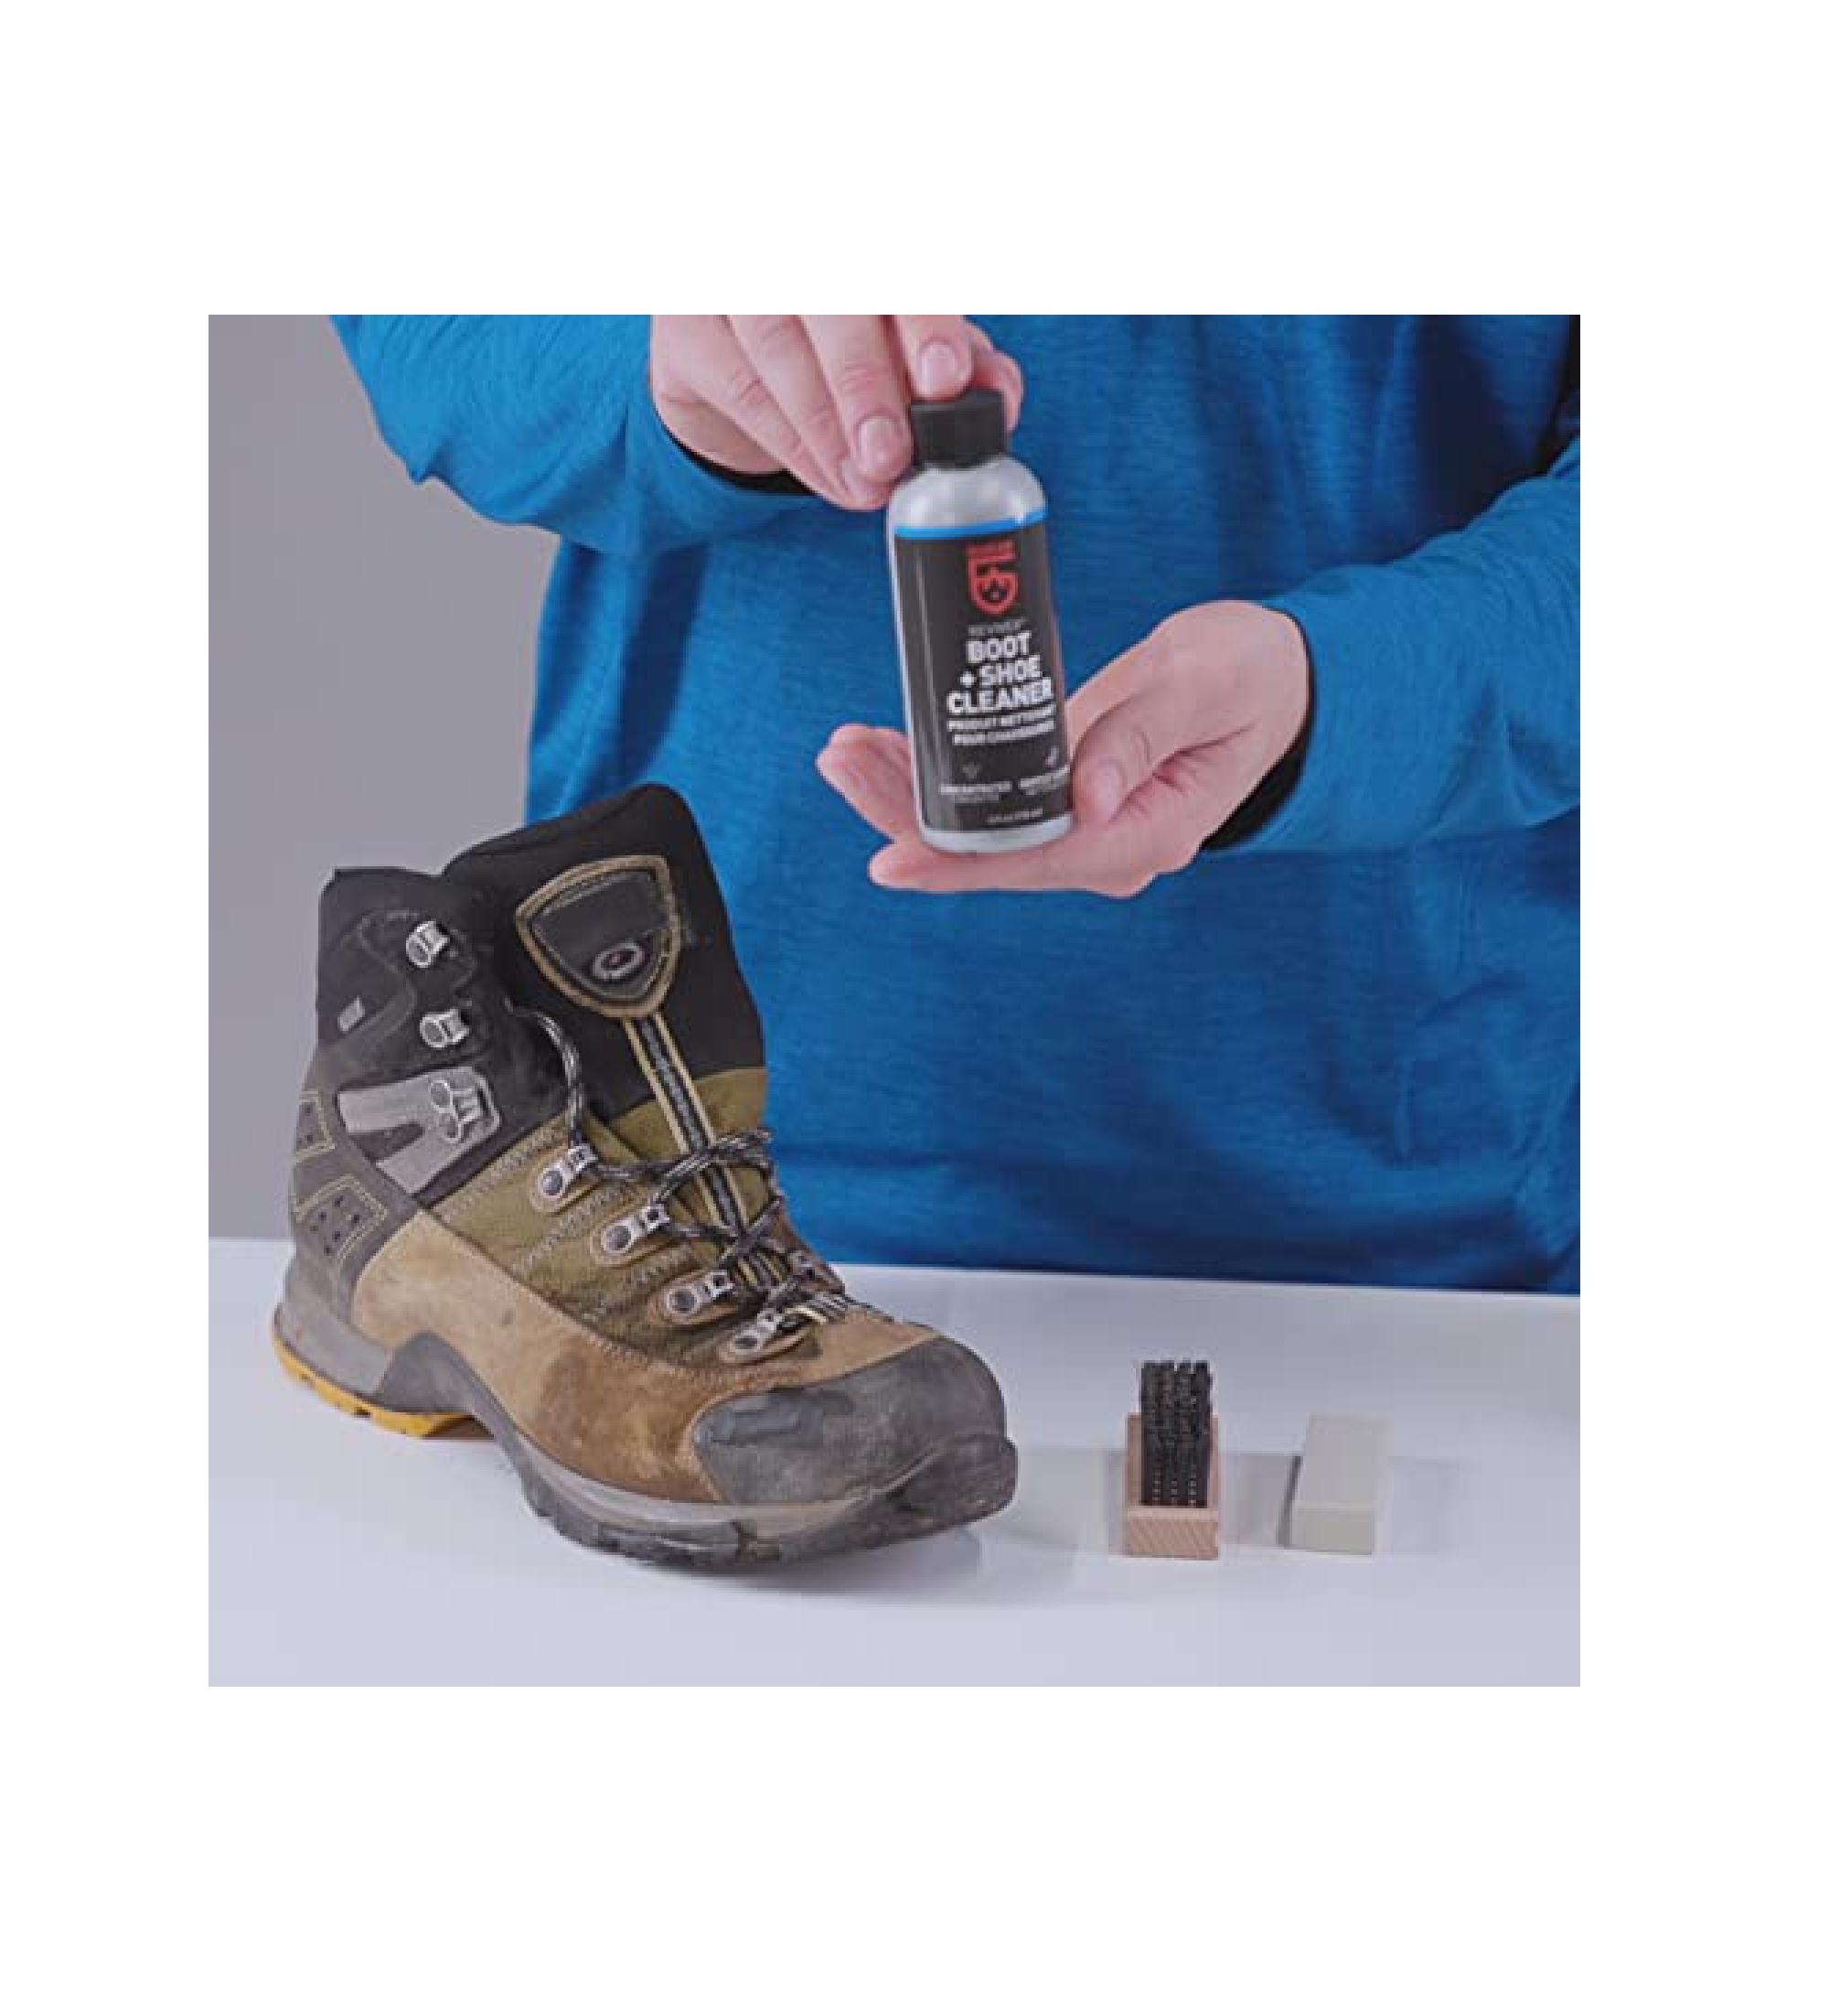 Revivex Boot Cleaner